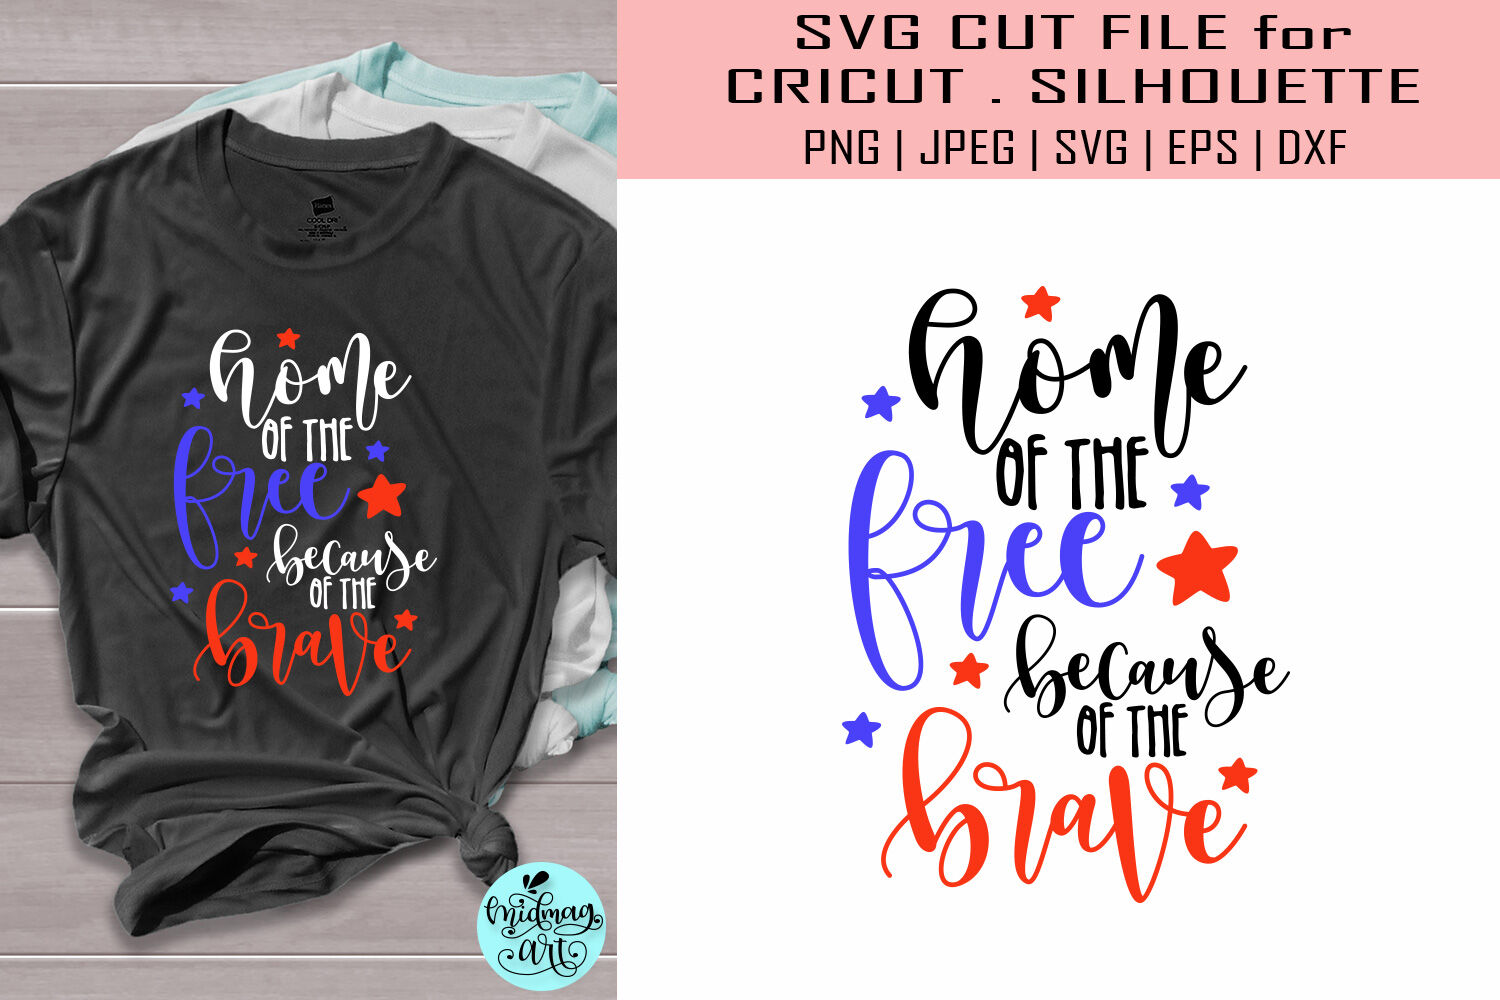 Free Free 244 Craft Cut Home Of The Free Because Of The Brave Svg SVG PNG EPS DXF File